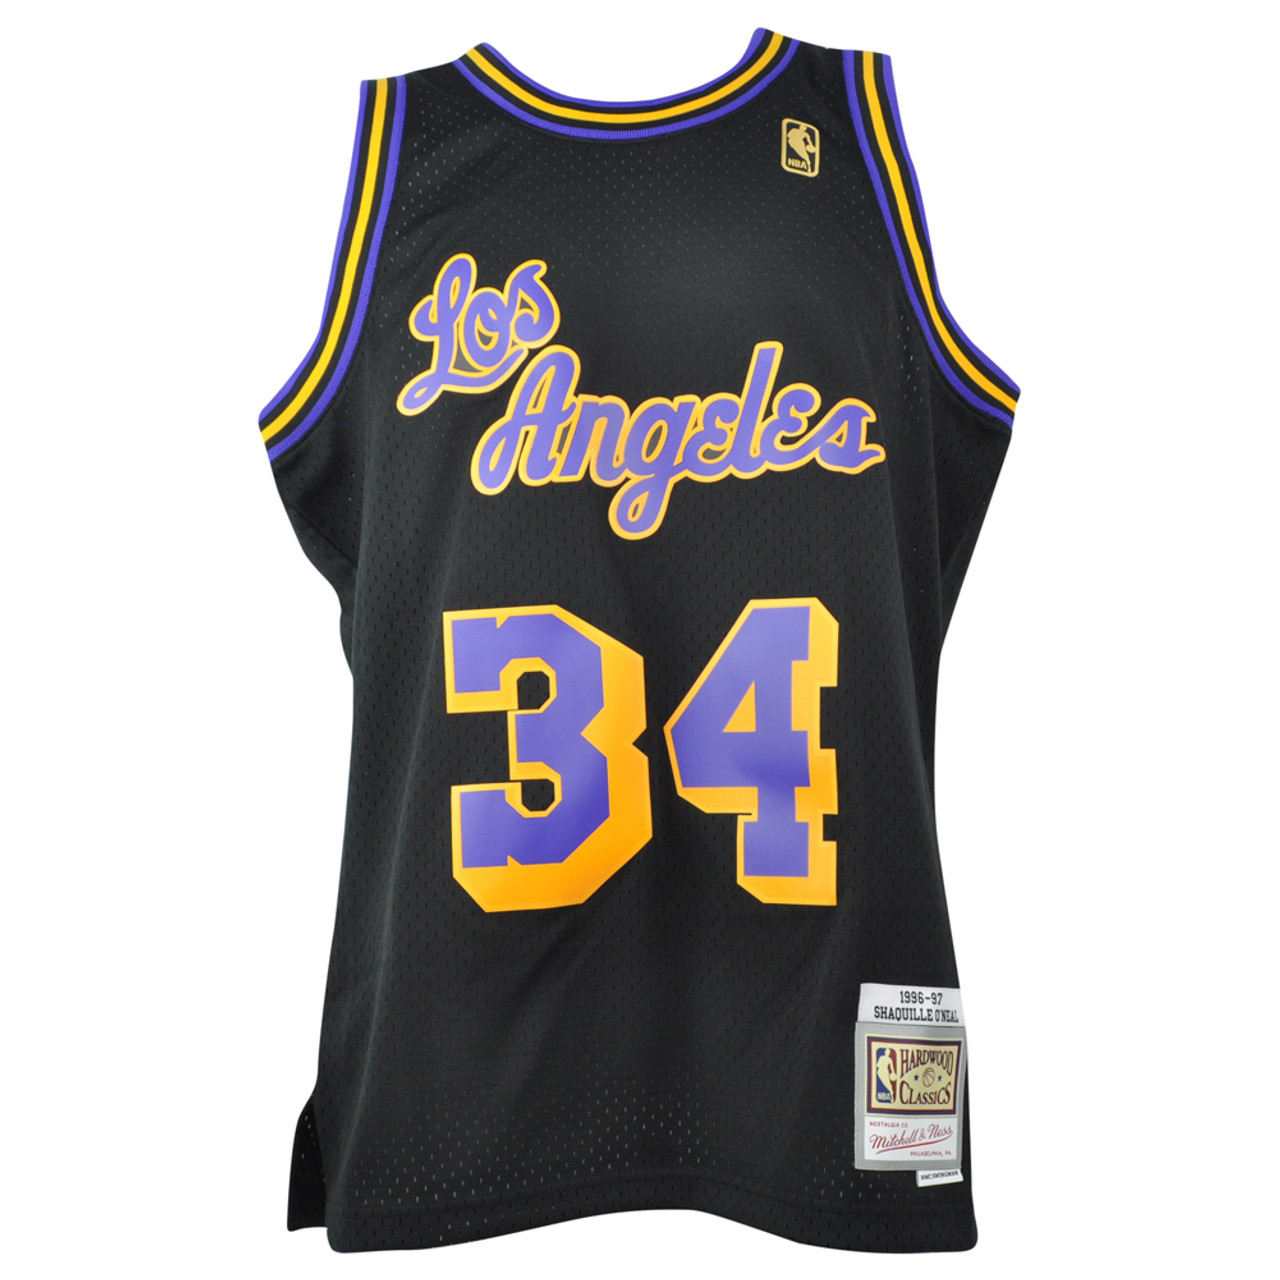 Shaquille O'Neal Los Angeles Lakers Mitchell & Ness 1996/97 Hardwood  Classics Fadeaway Swingman Player Jersey - Light Blue/Blue